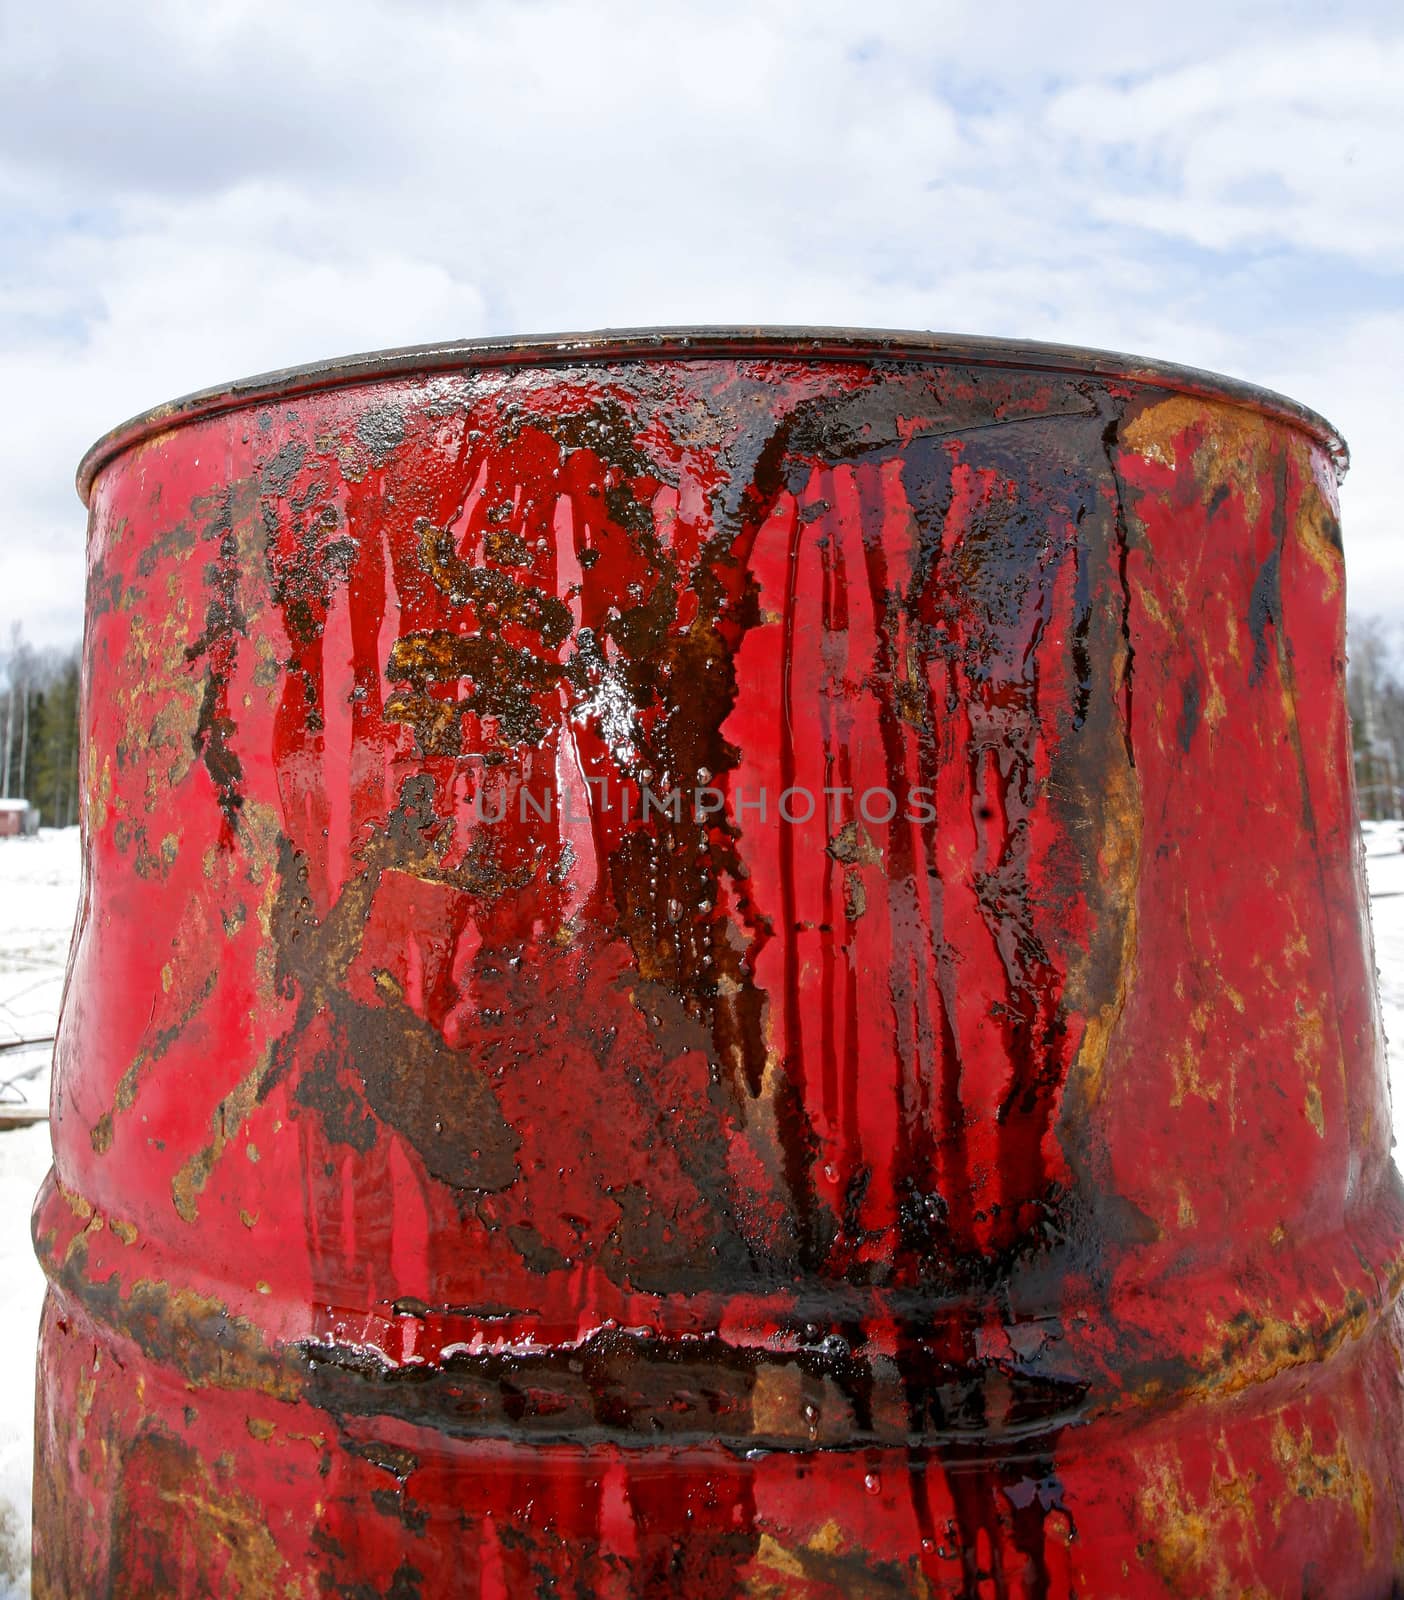 Close up oil in red barrel on the background of blue sky